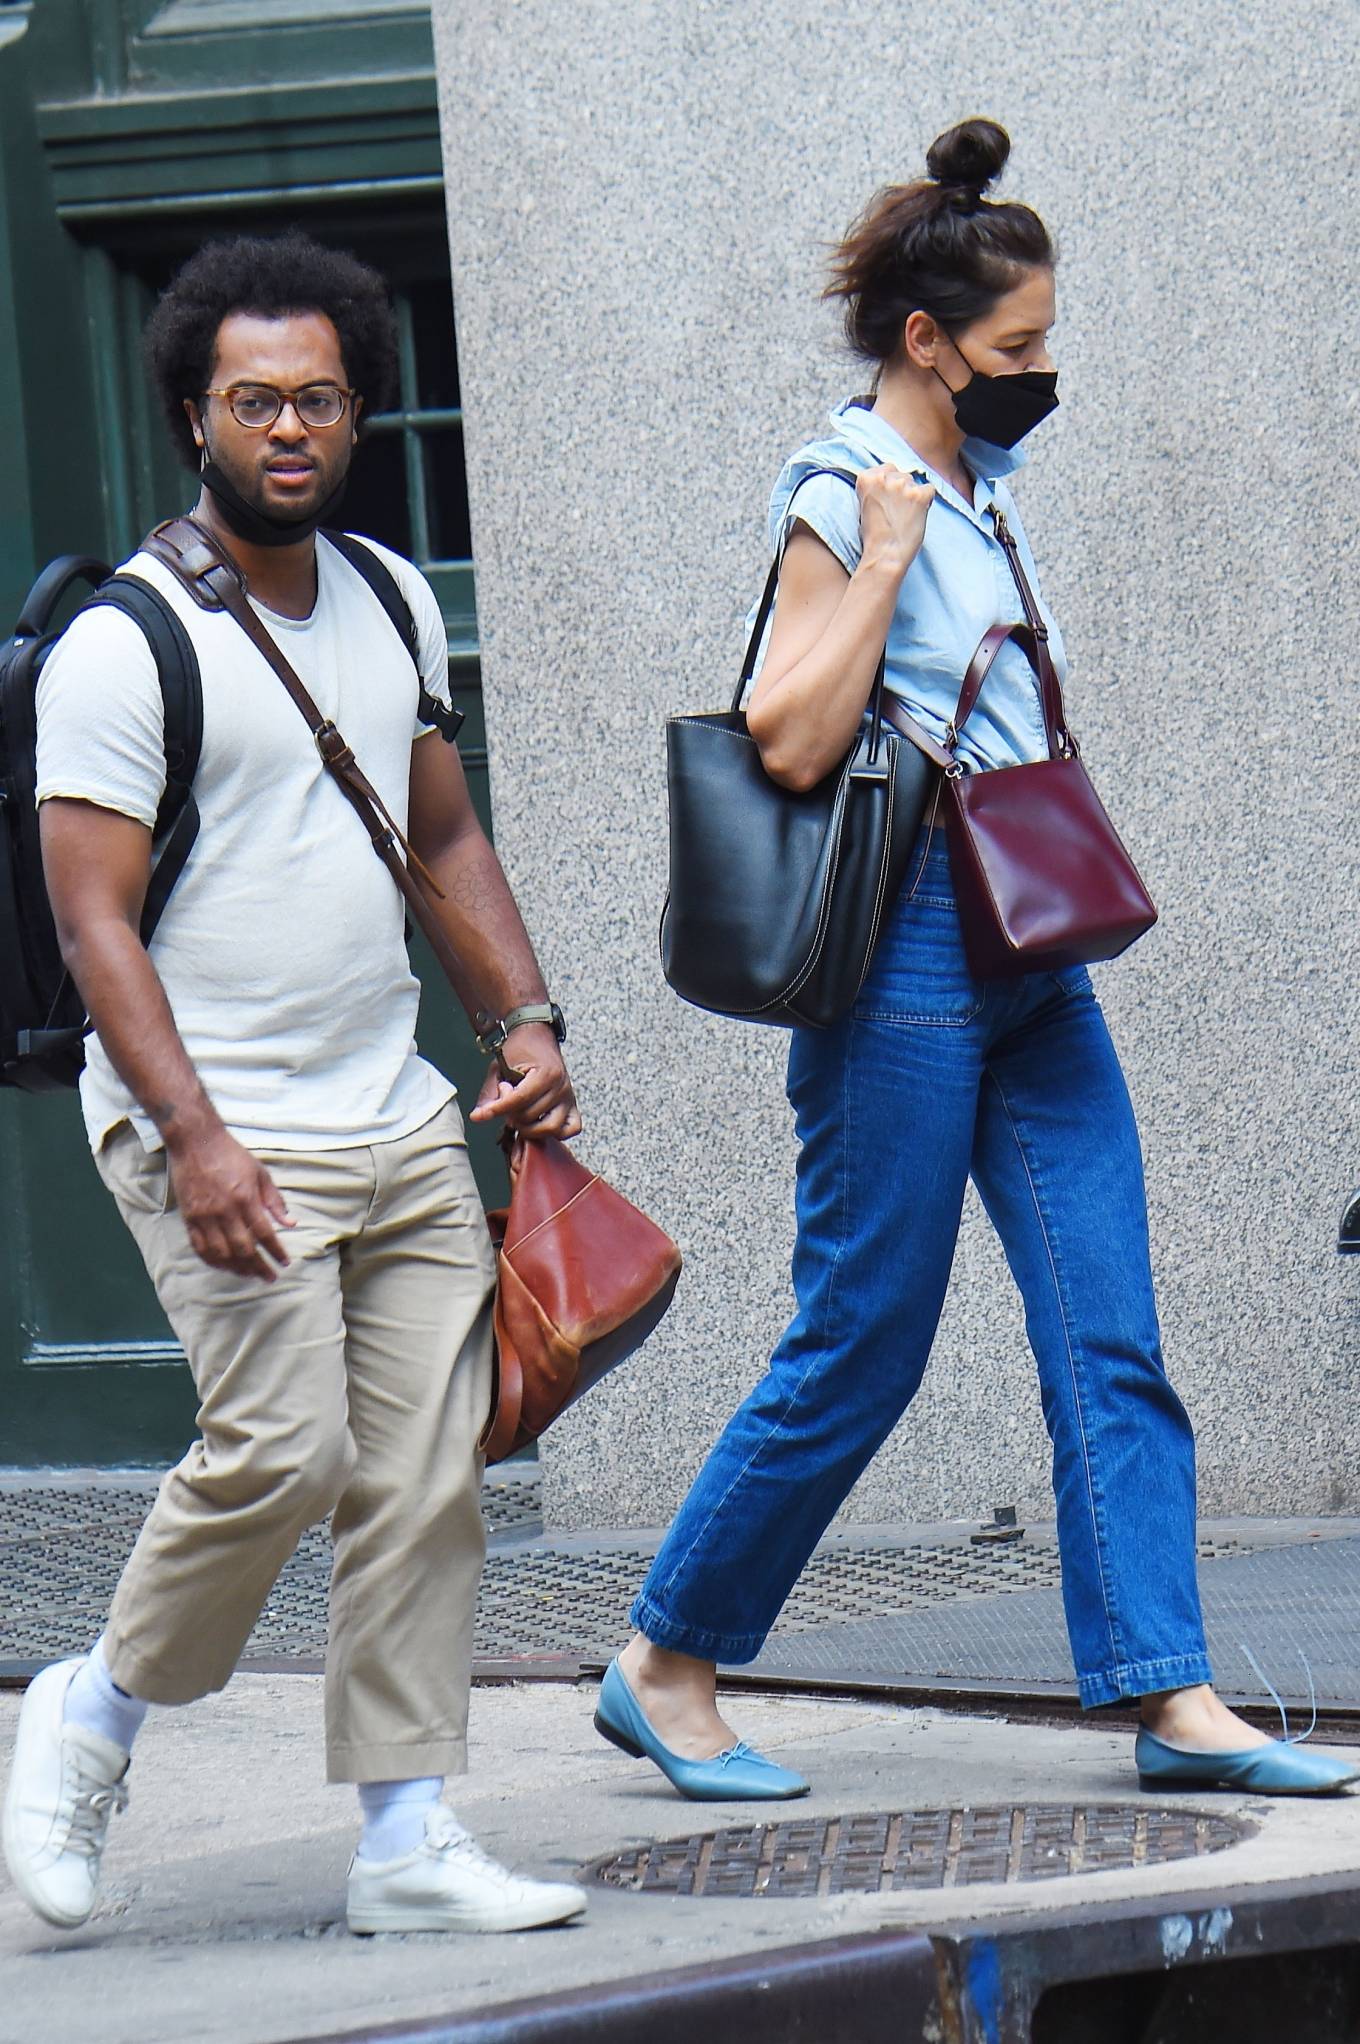 Katie Holmes - With boyfriend Bobby Wooten III out in Soho